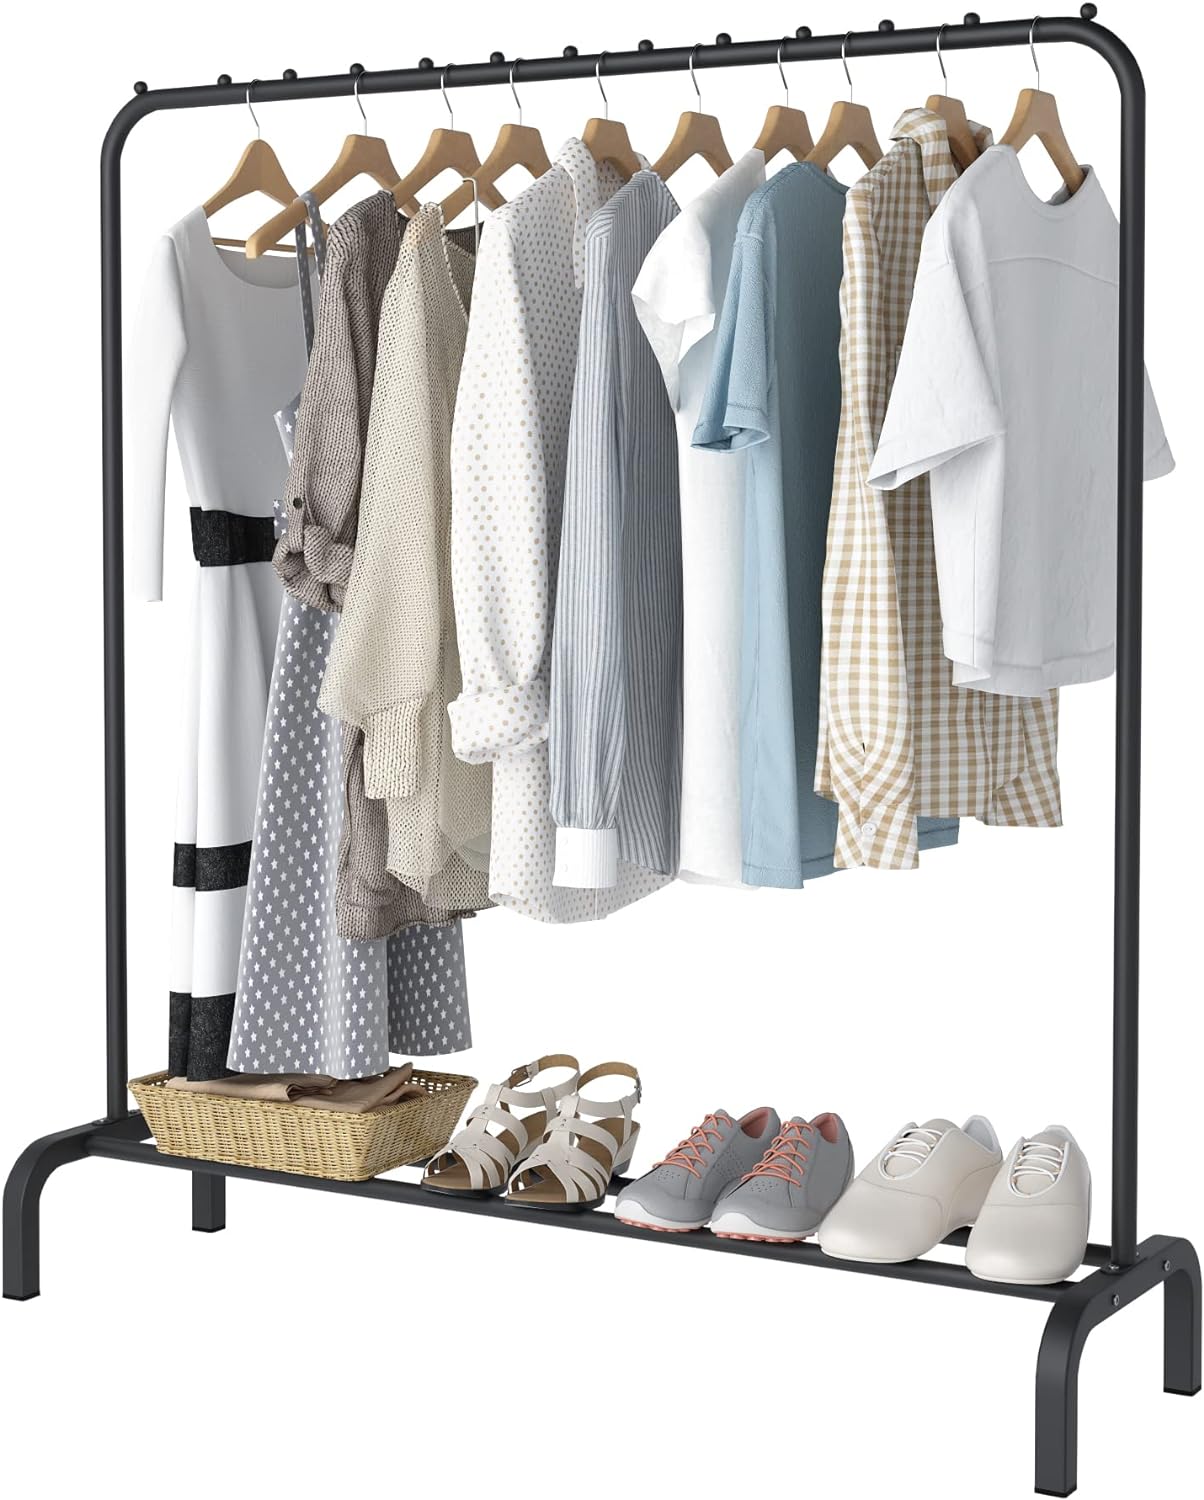 ACCSTORE Clothes Rail Rack Metal Rack Garment Rack Freestanding Hanger Bedroom Clothing Rack with Lower Storage Shelf for Boxes Shoes,Black